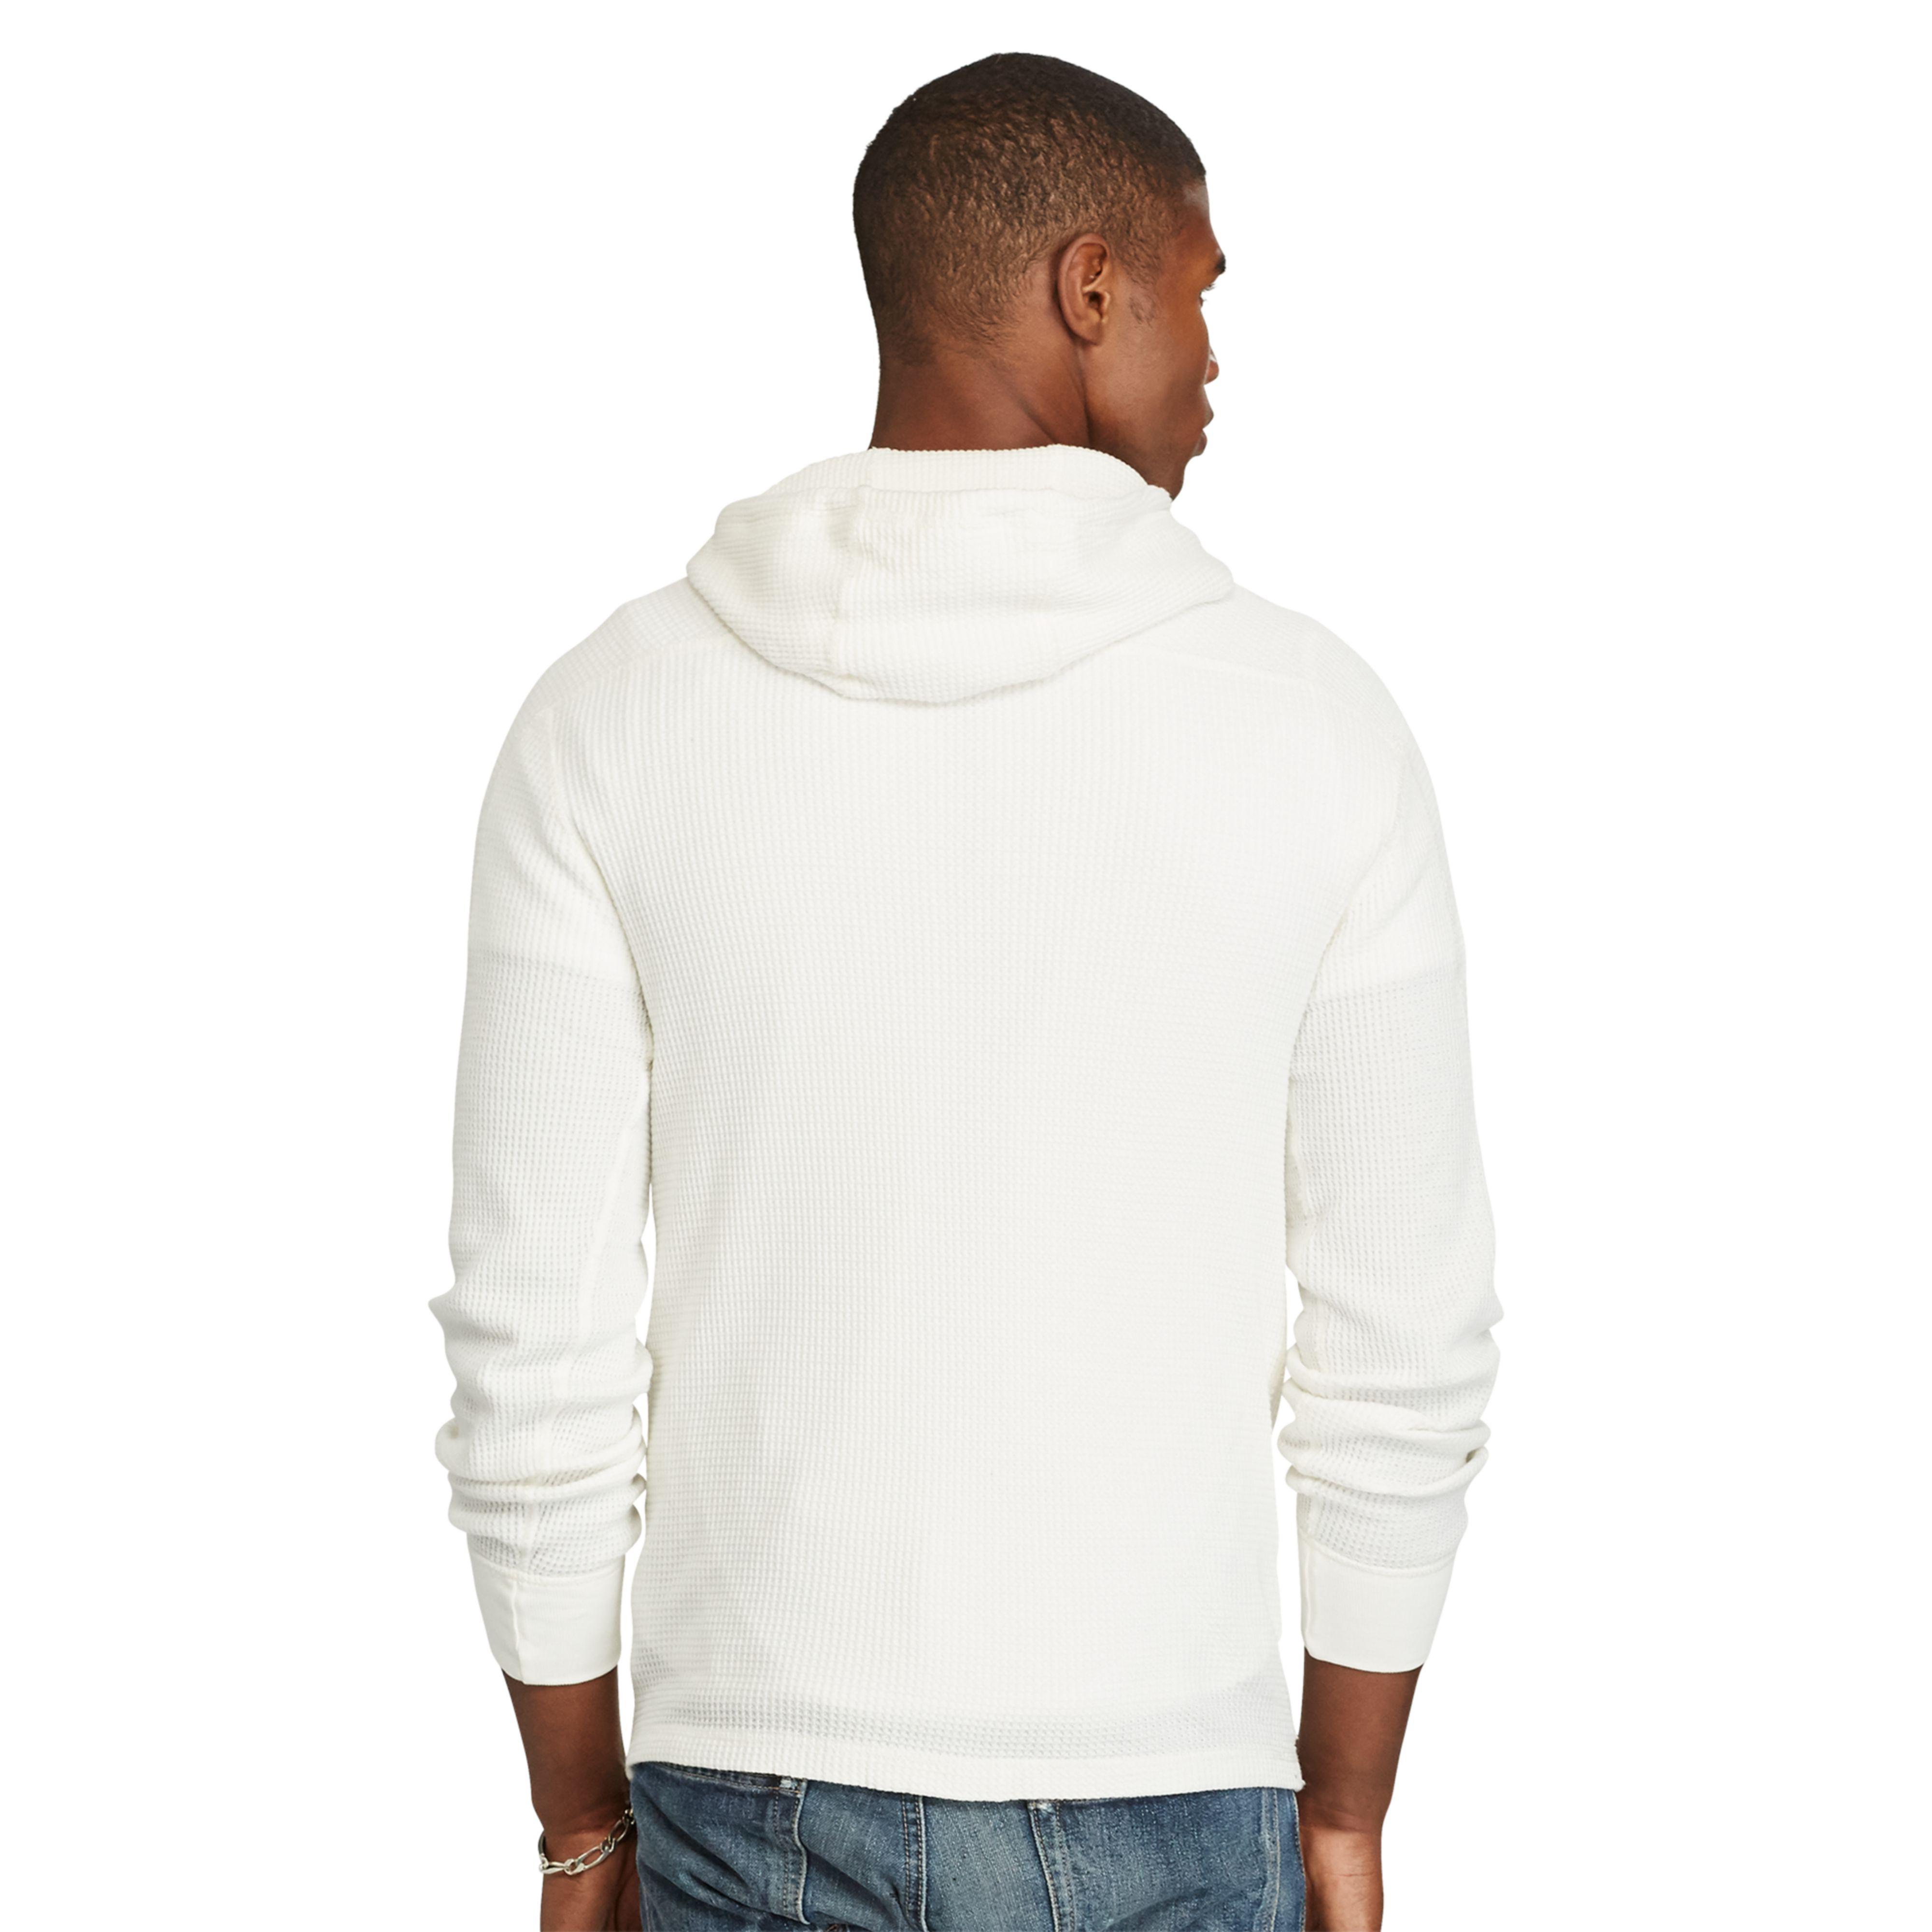 Polo Ralph Lauren Waffle-knit Cotton Hoodie in White for Men - Lyst